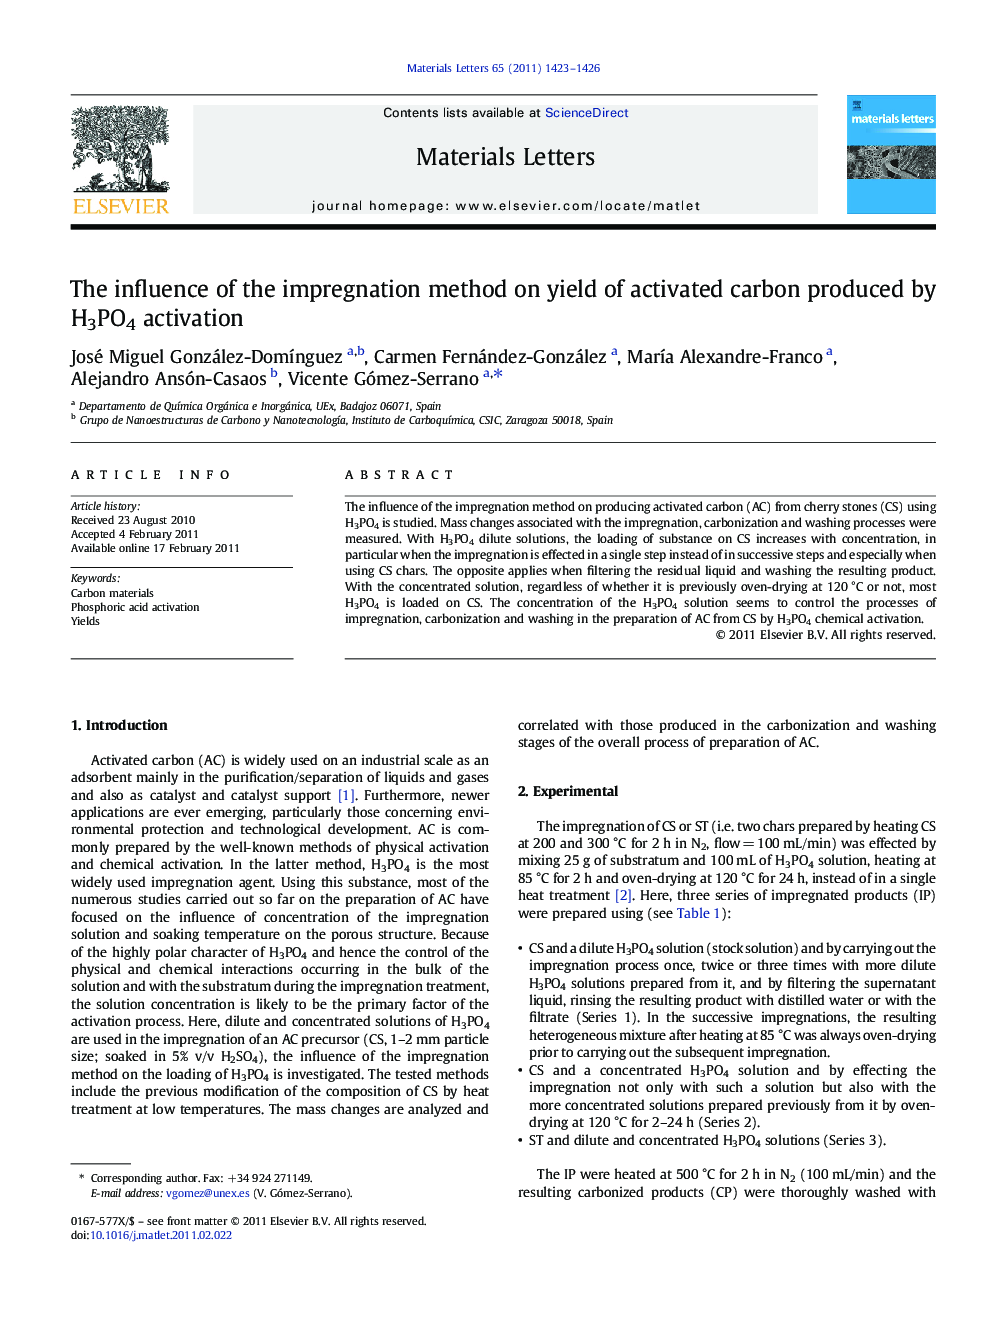 The influence of the impregnation method on yield of activated carbon produced by H3PO4 activation